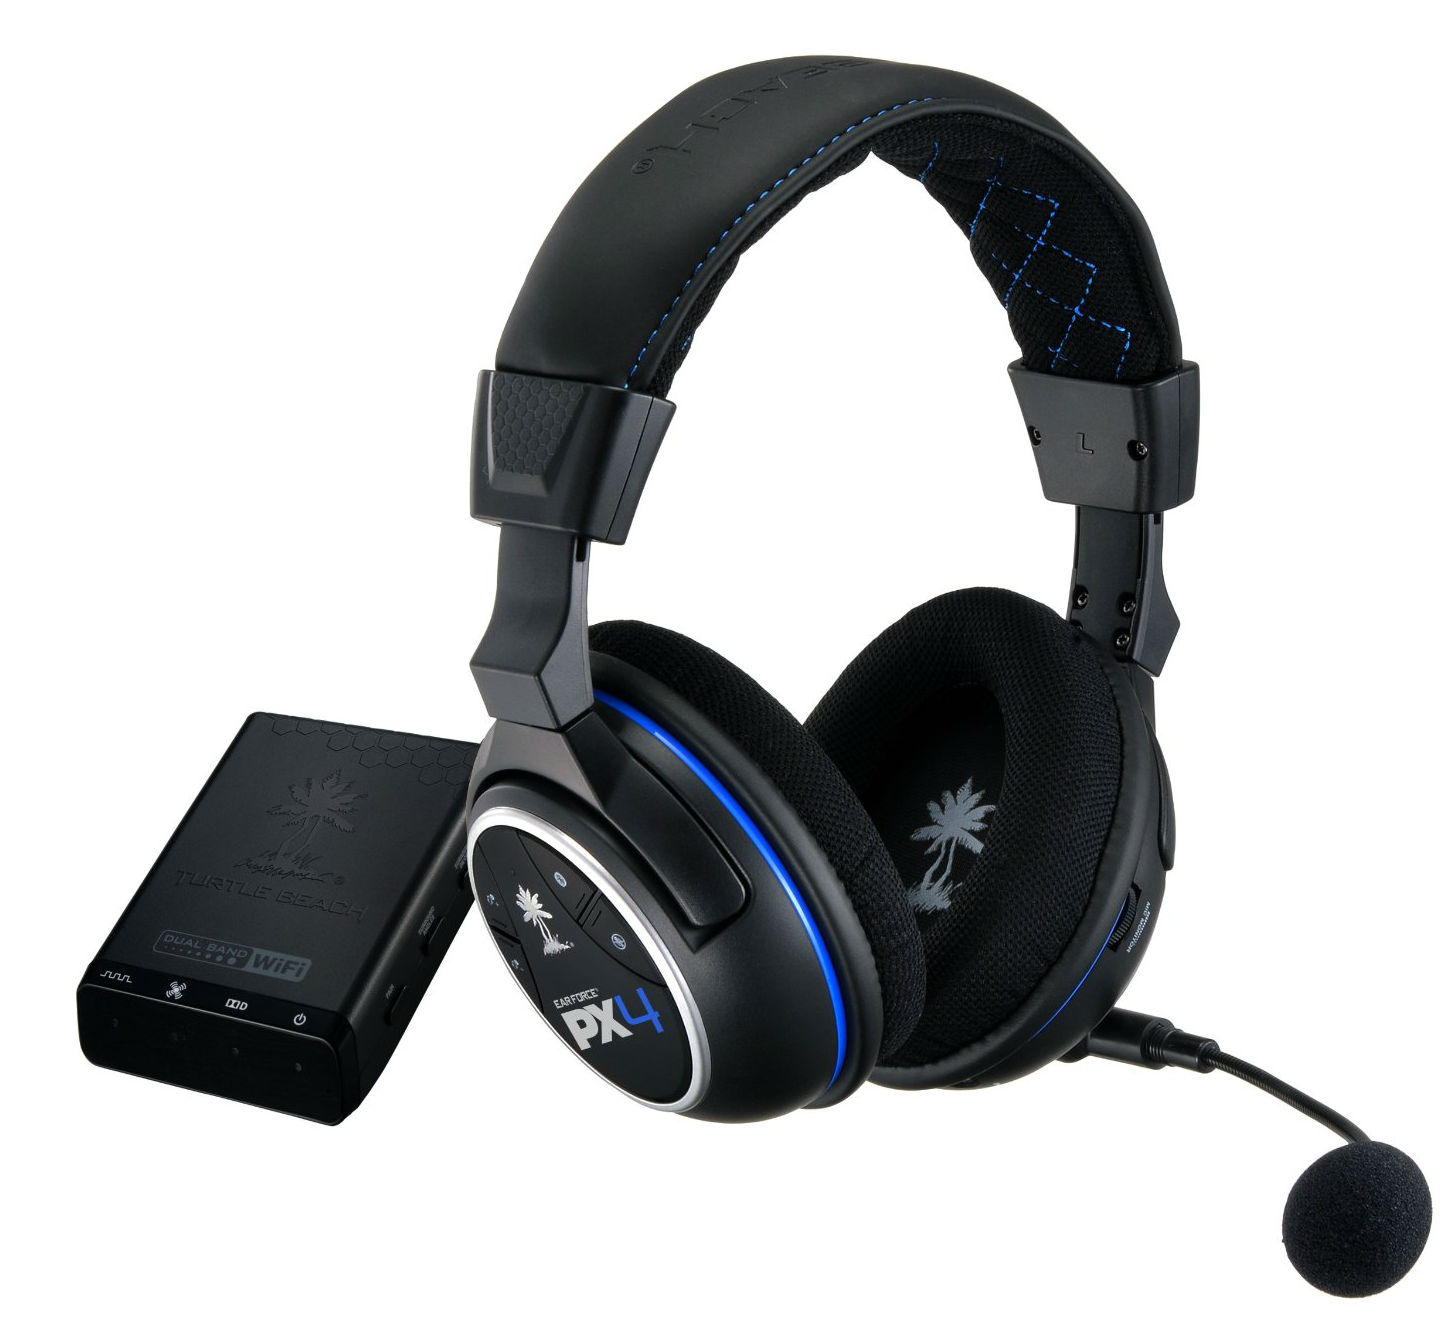 Turtle Beach teams up with Sony for new headsets